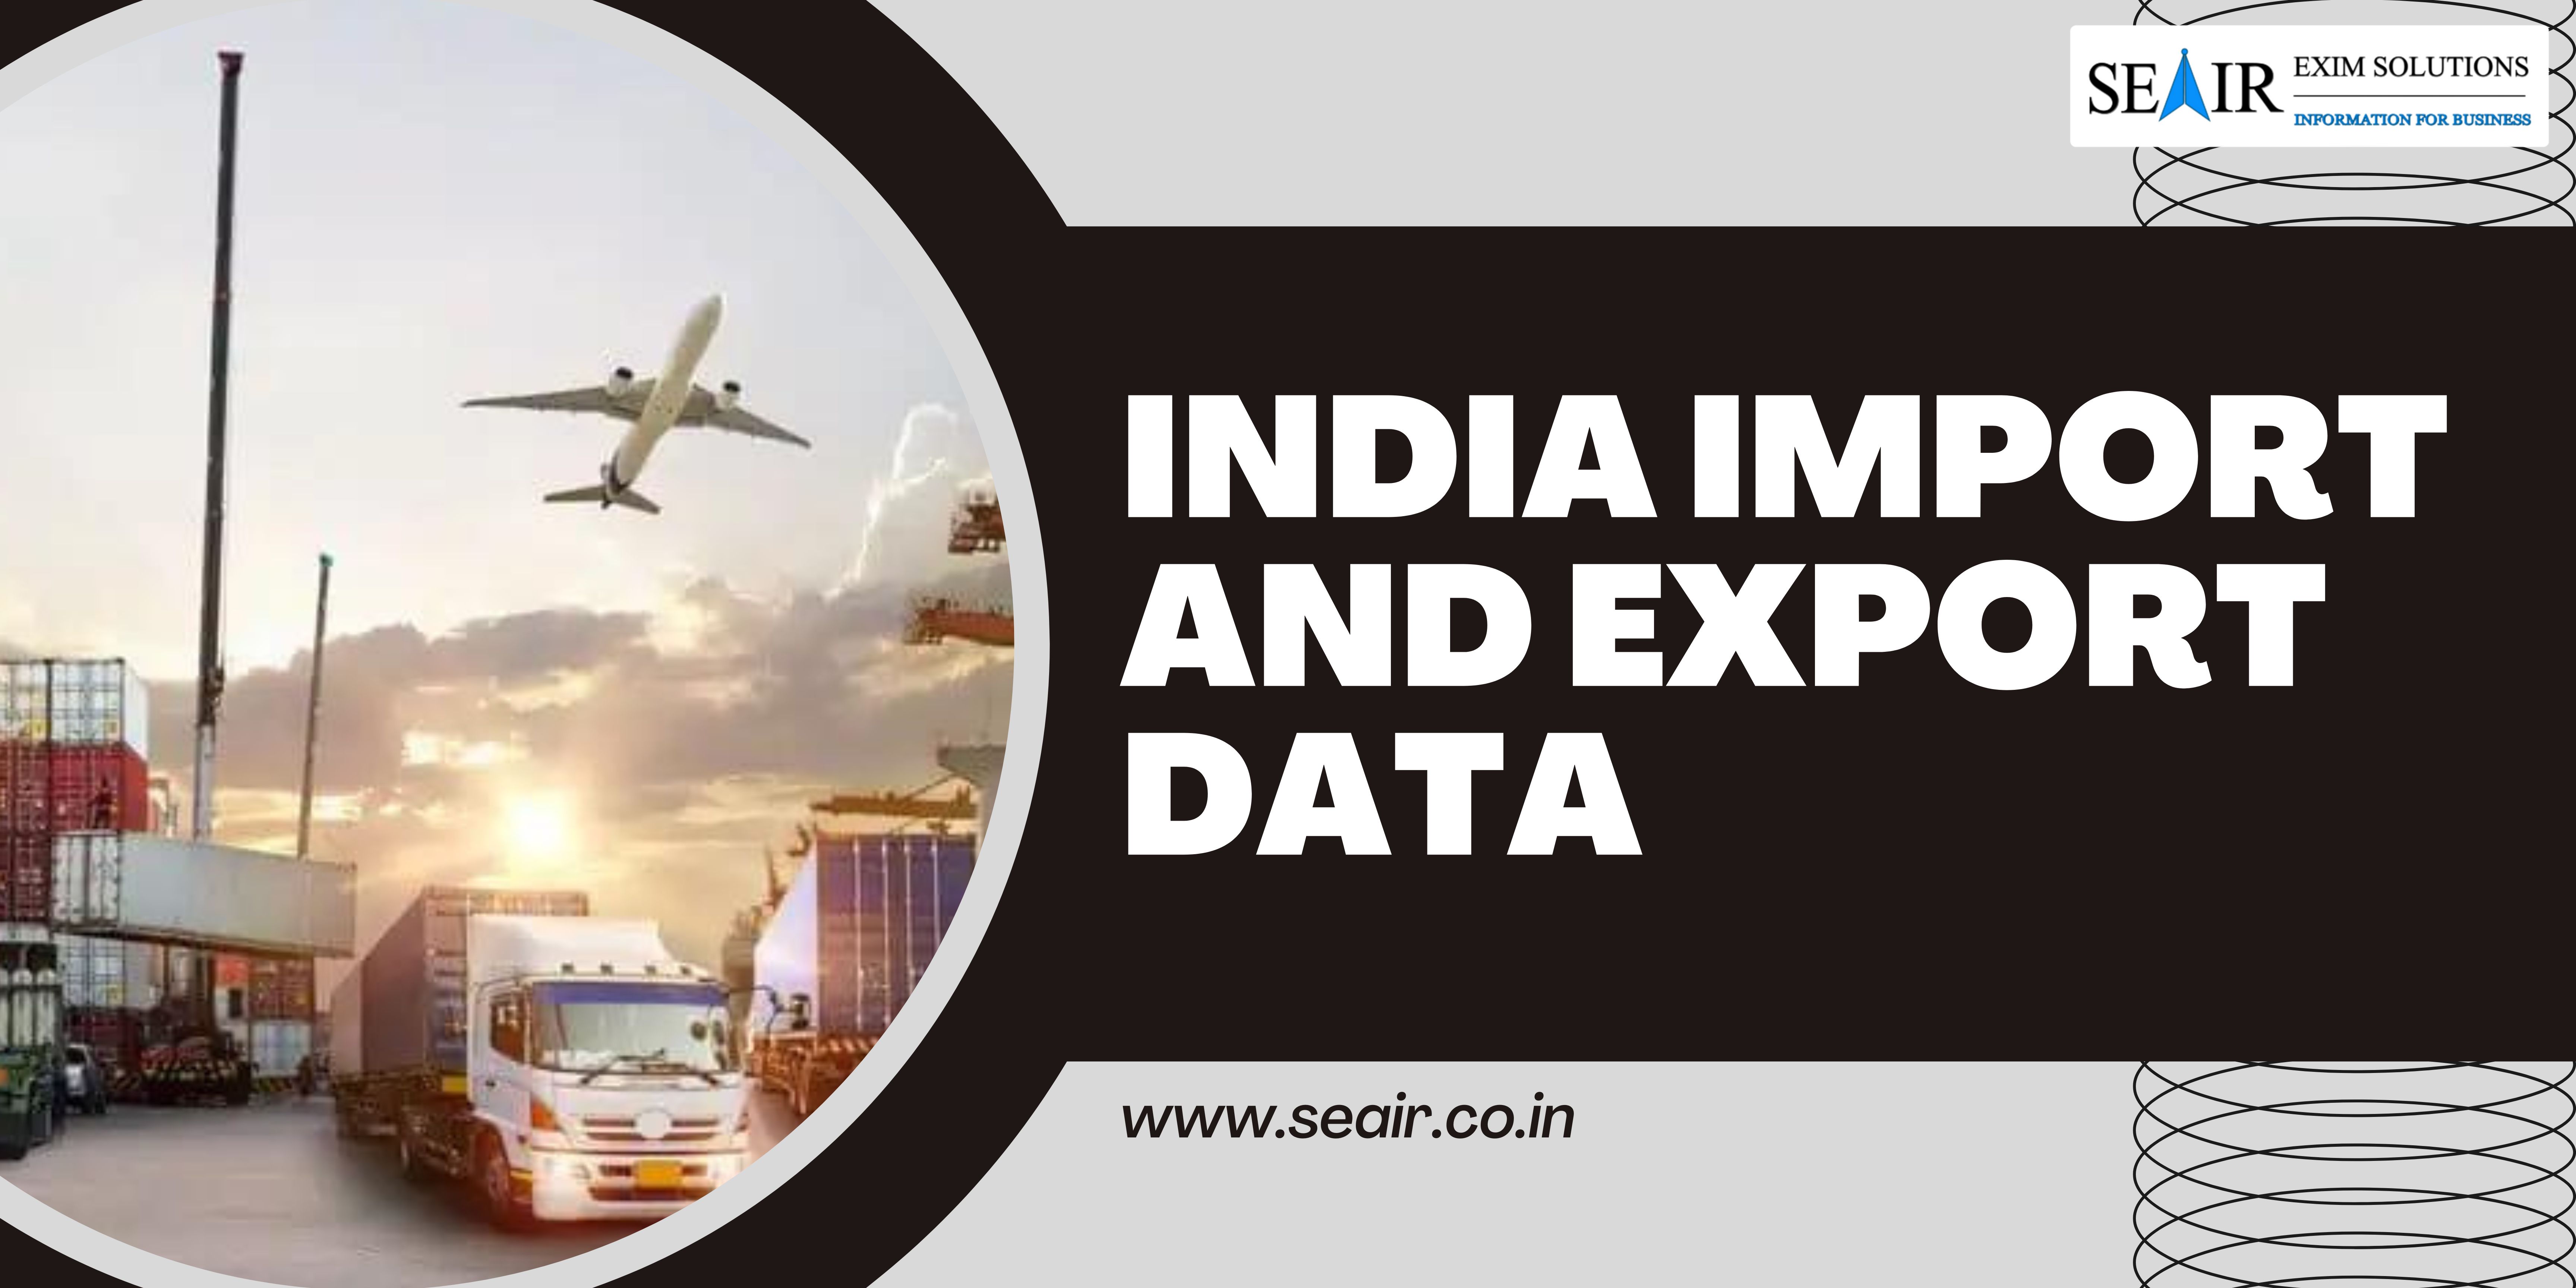 (~—""

EXIM SOLUTIONS
SEAIR EMemons

INFORMATION FOR BUSINESS
= 9

A INDIAIMPORT
1 AND EXPORT
DATA

    
 
  

     
    
  

   

 
   
   
 
   

www.sedqir.co.in